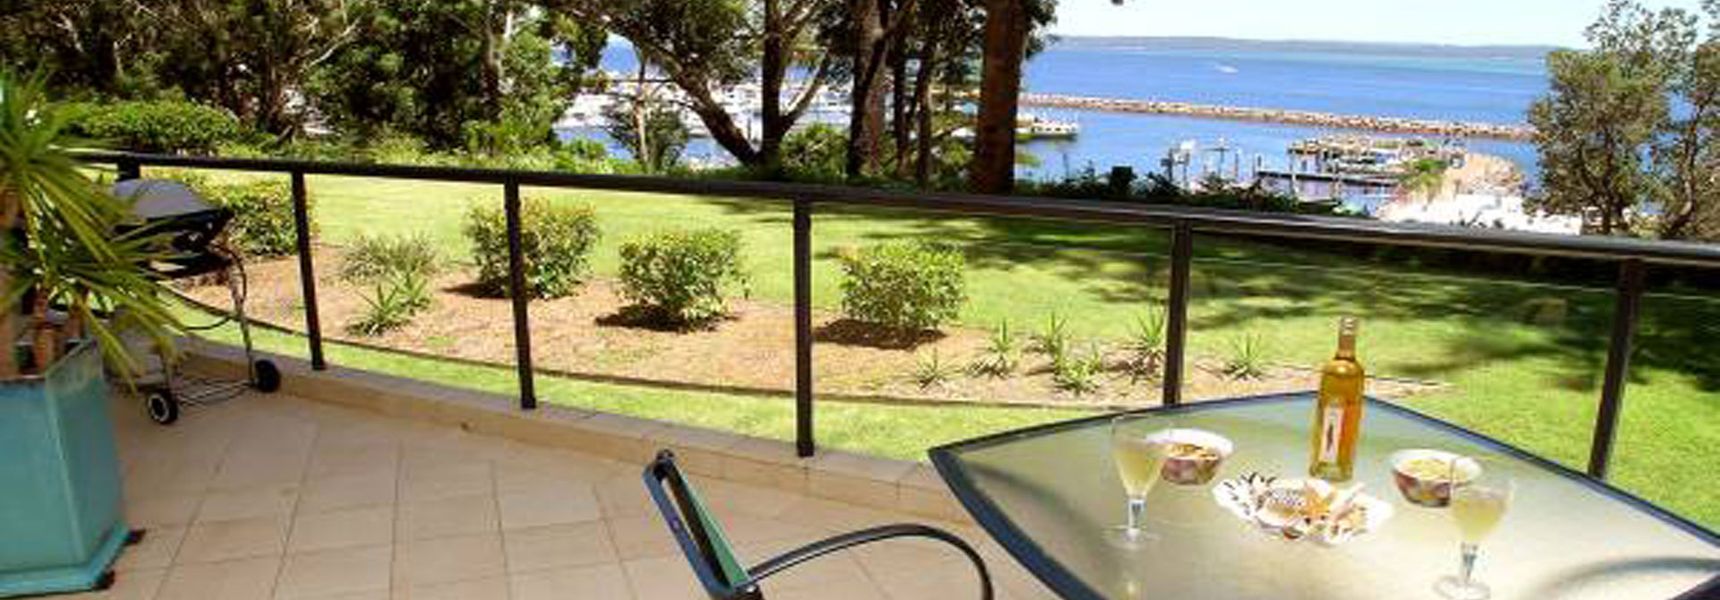 Magnus Pines, 2/52-56 Magnus Street – stunning unit with aircon, water views & foxtel